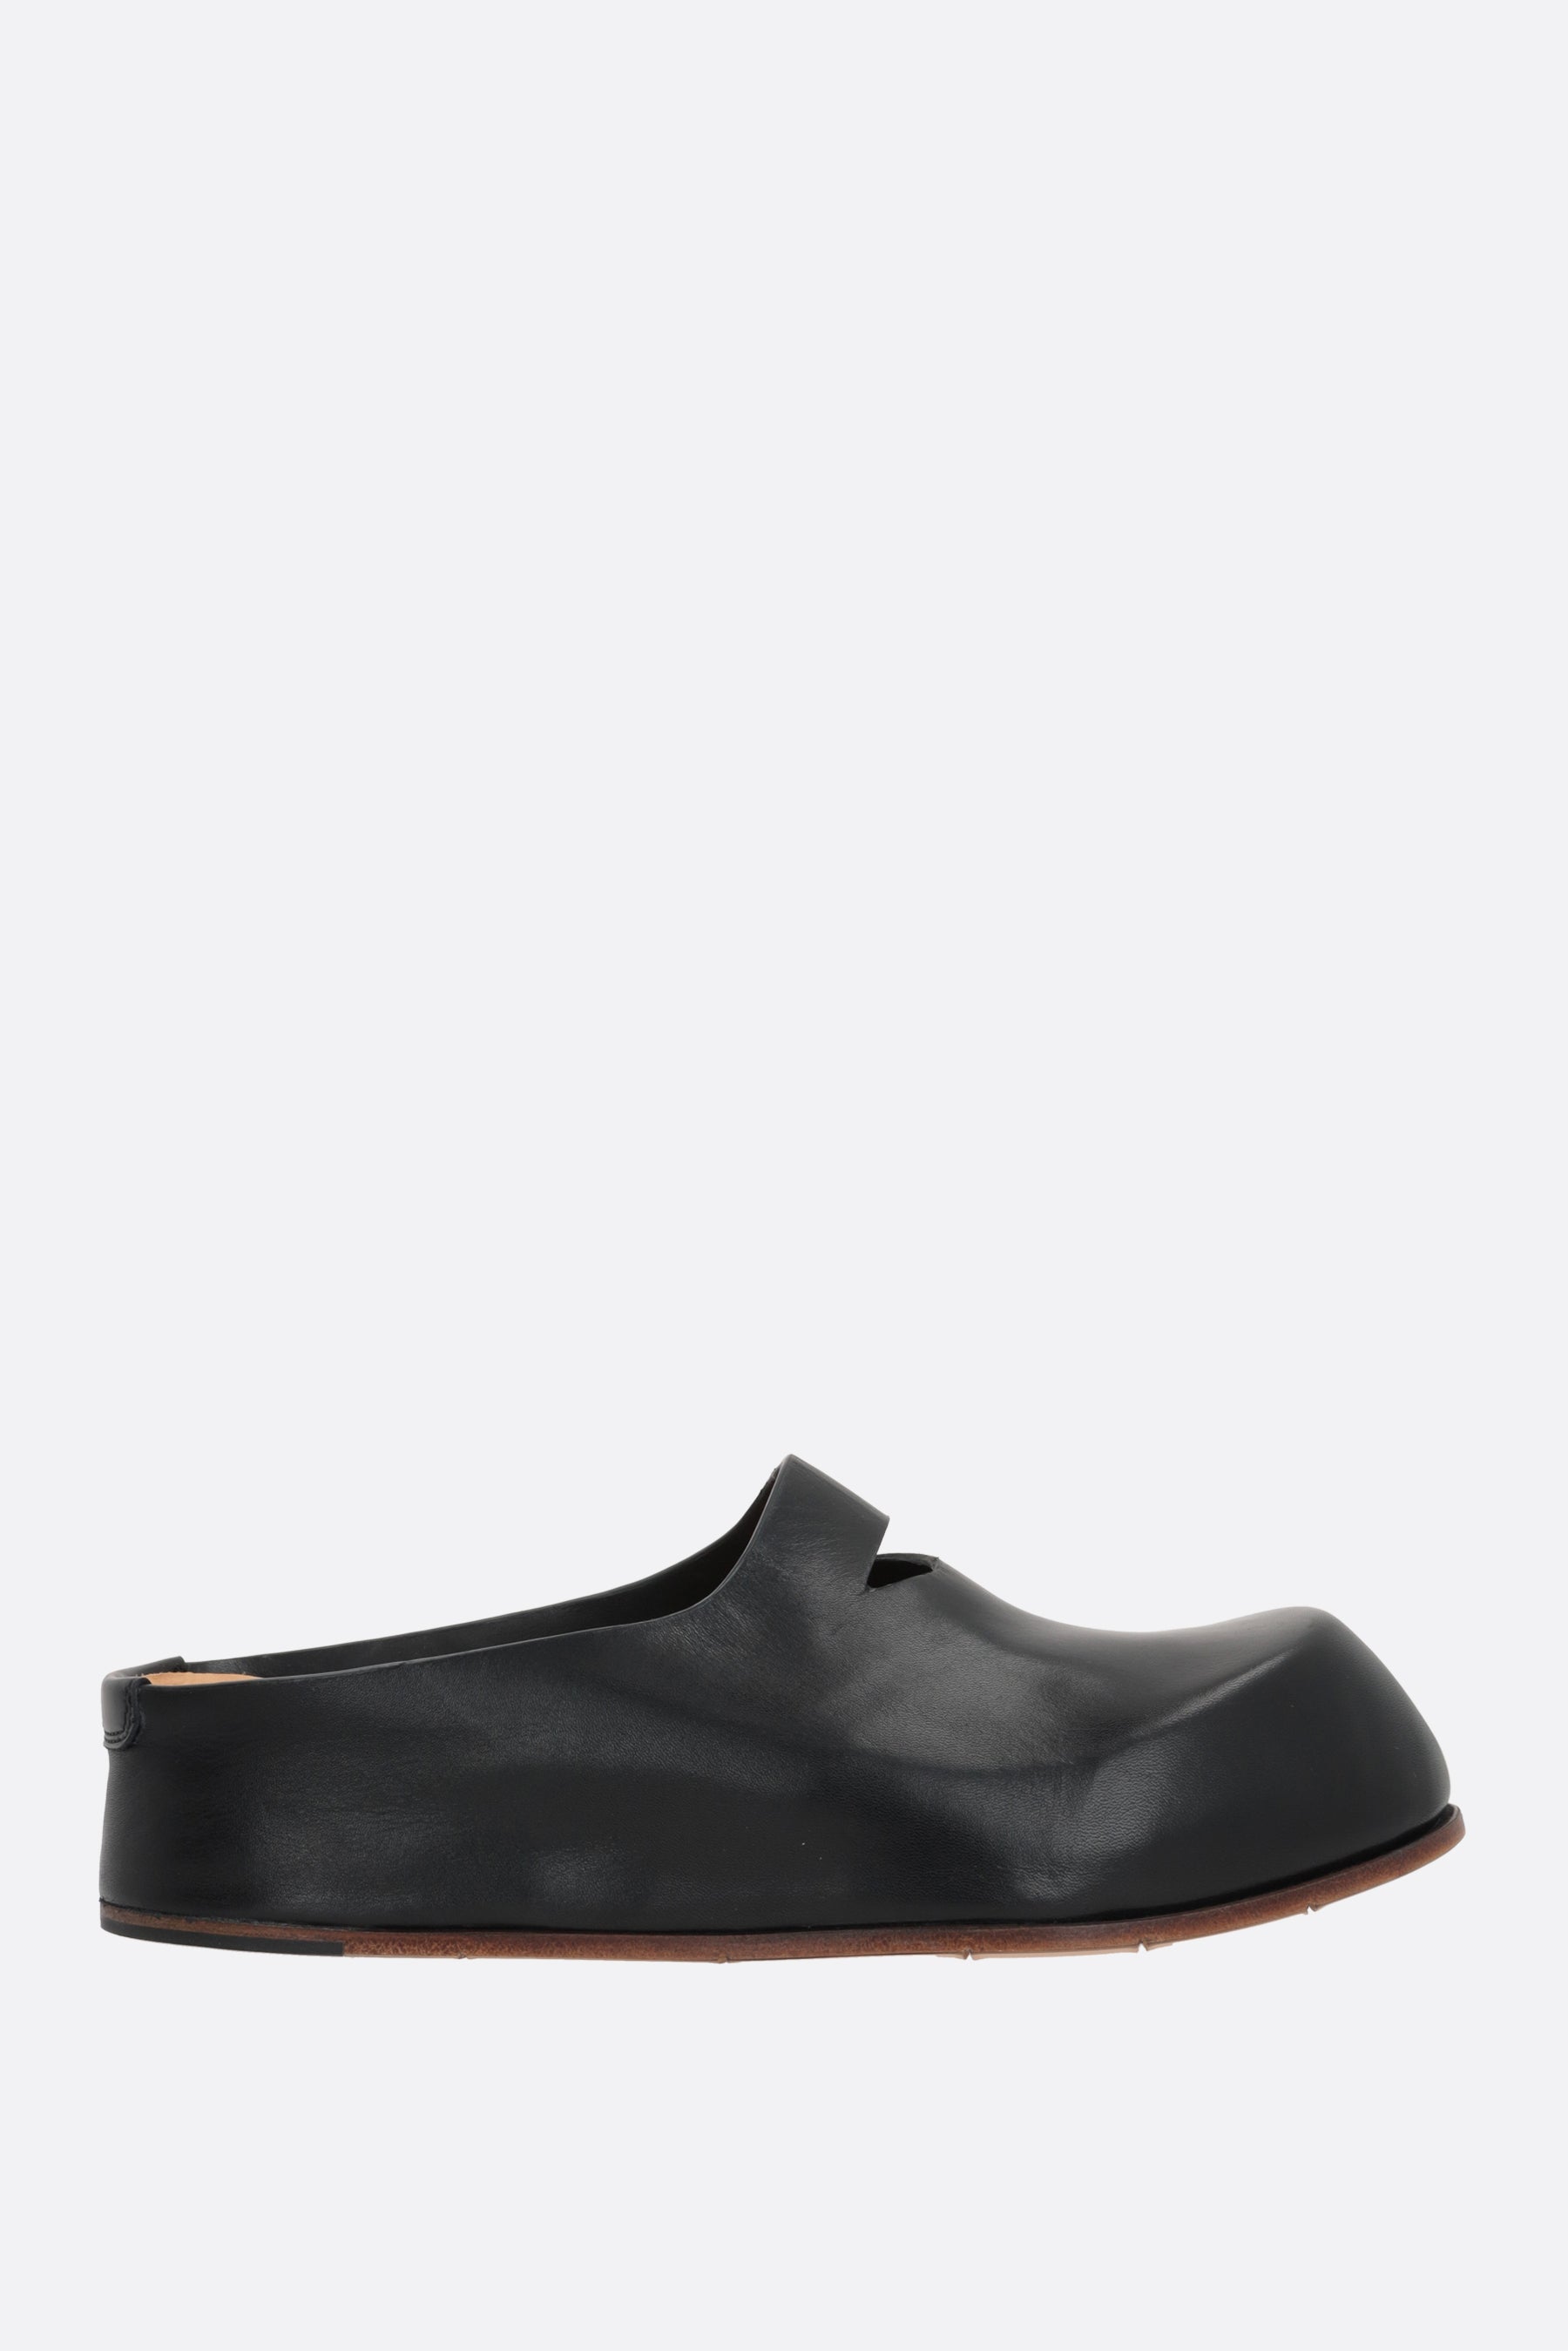 Elba smooth leather flat mules